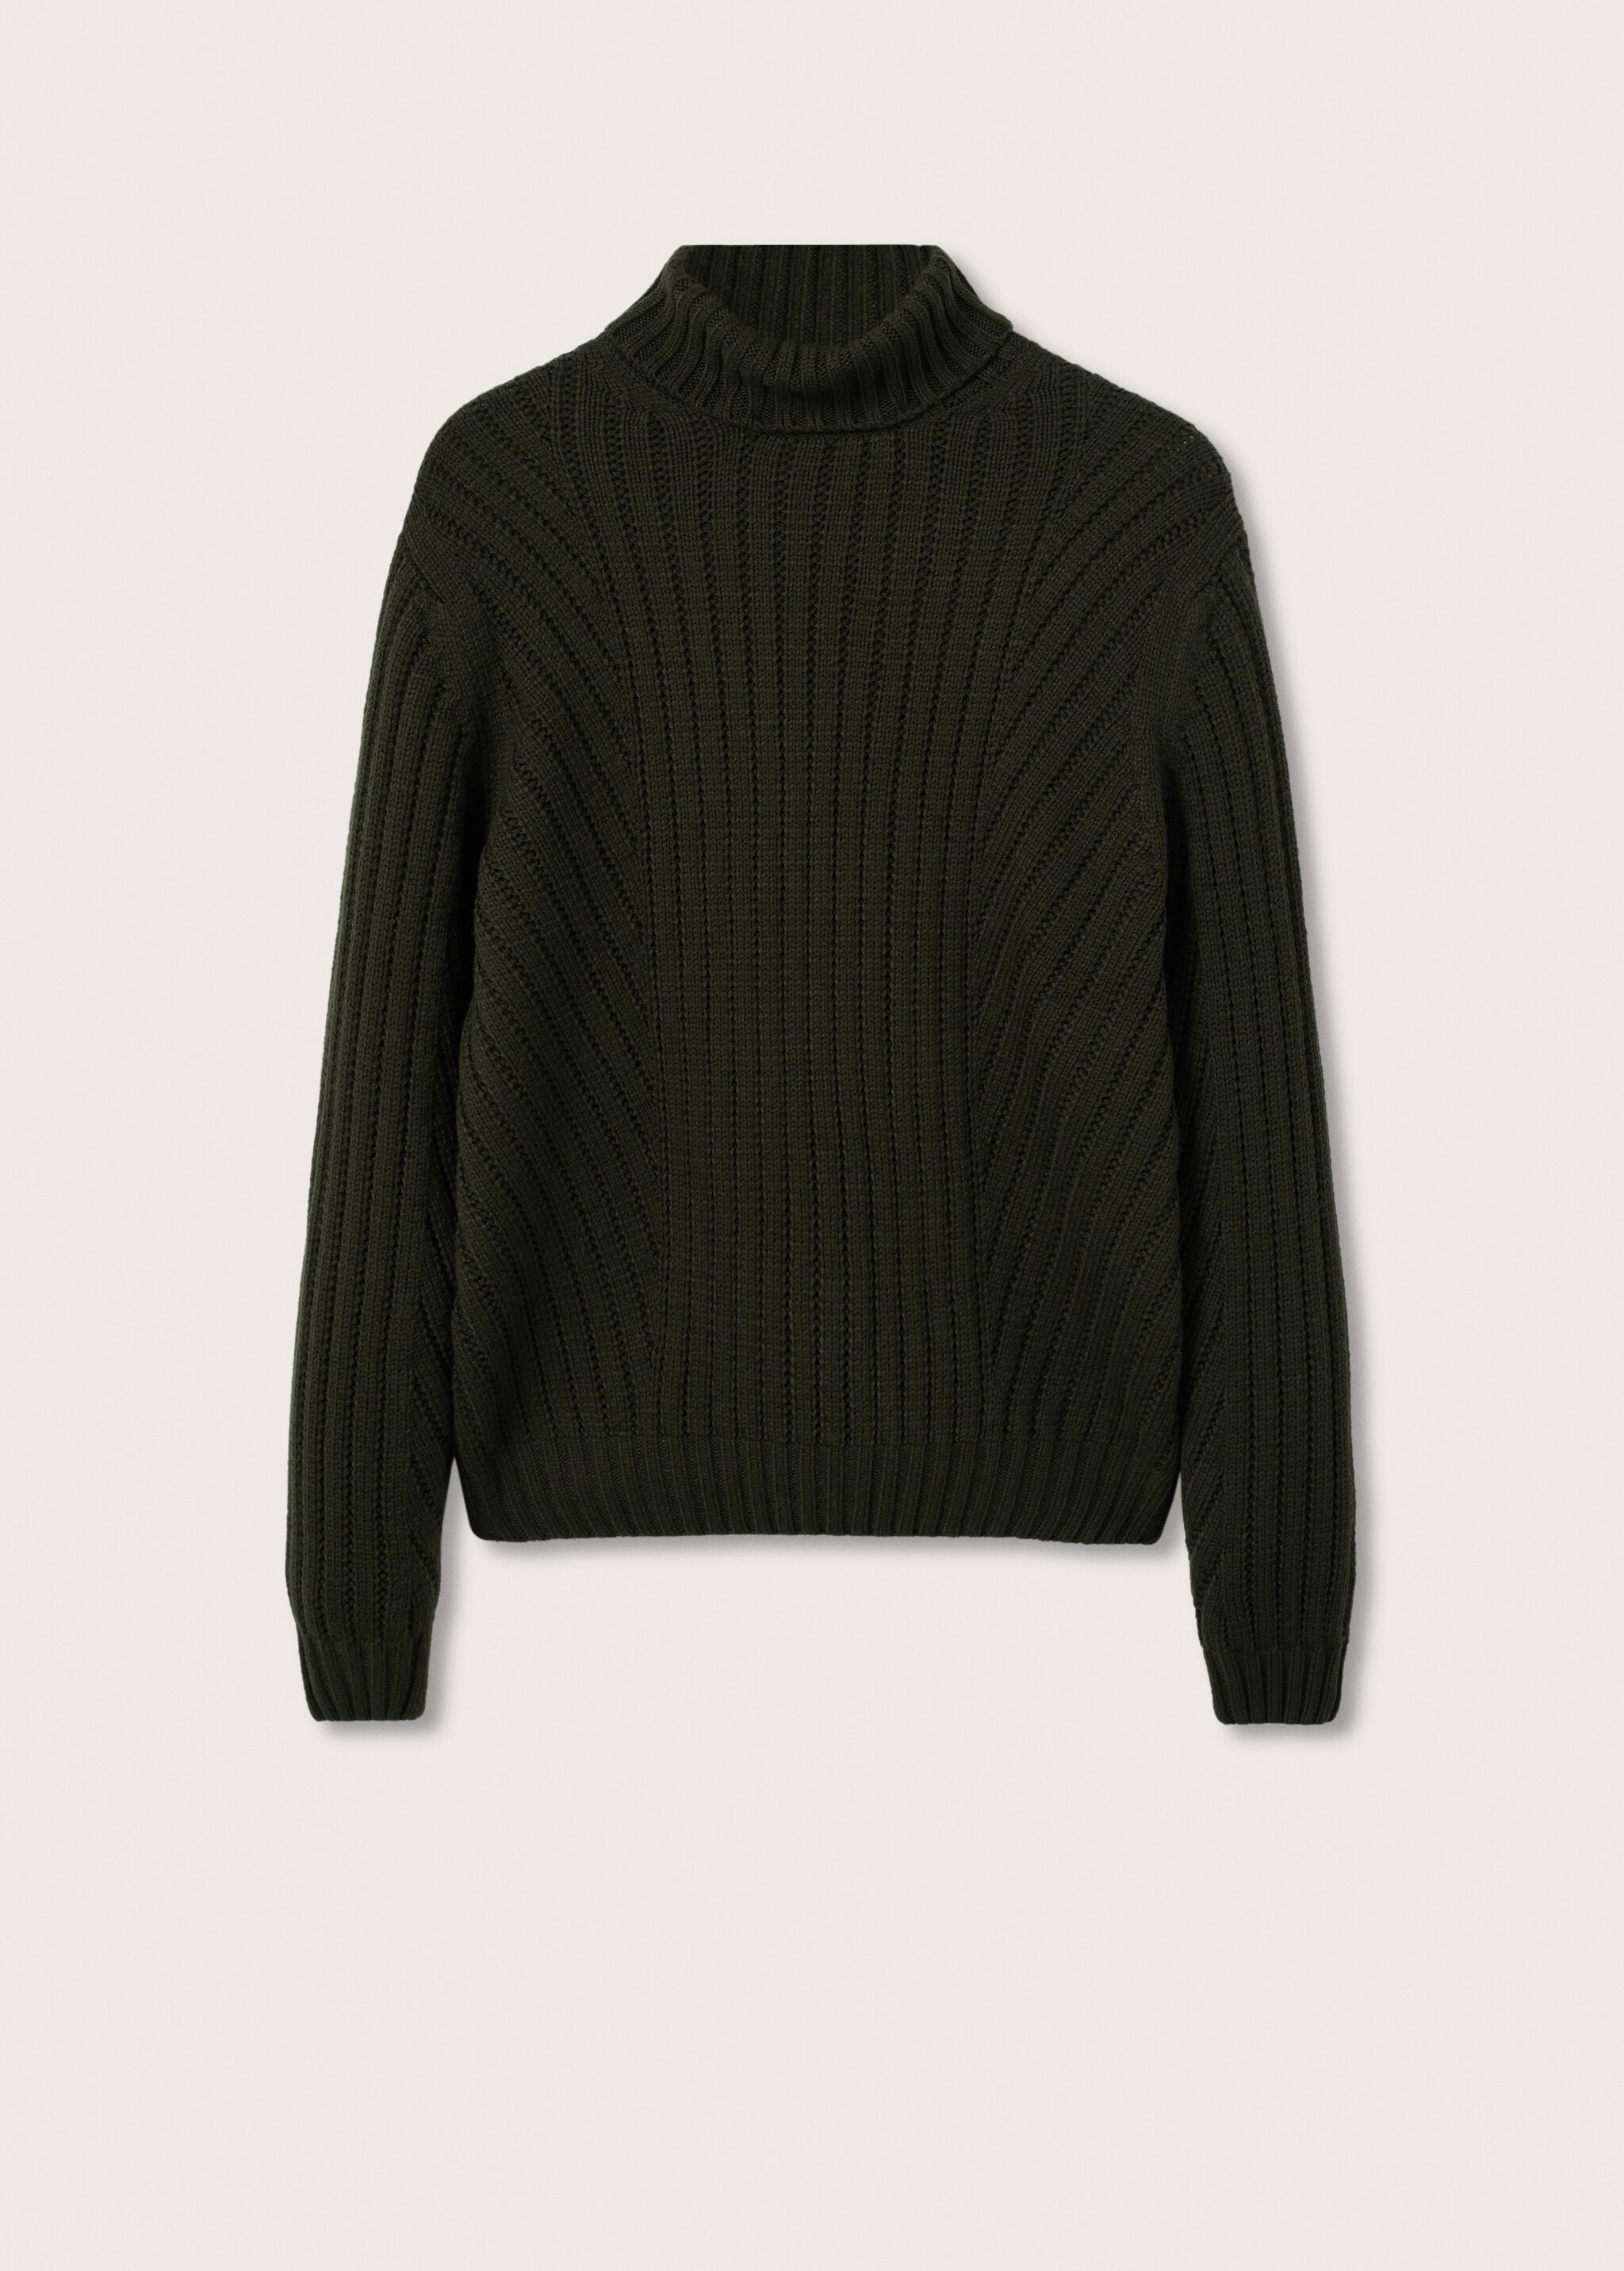 Turtleneck ribbed sweater - Article without model